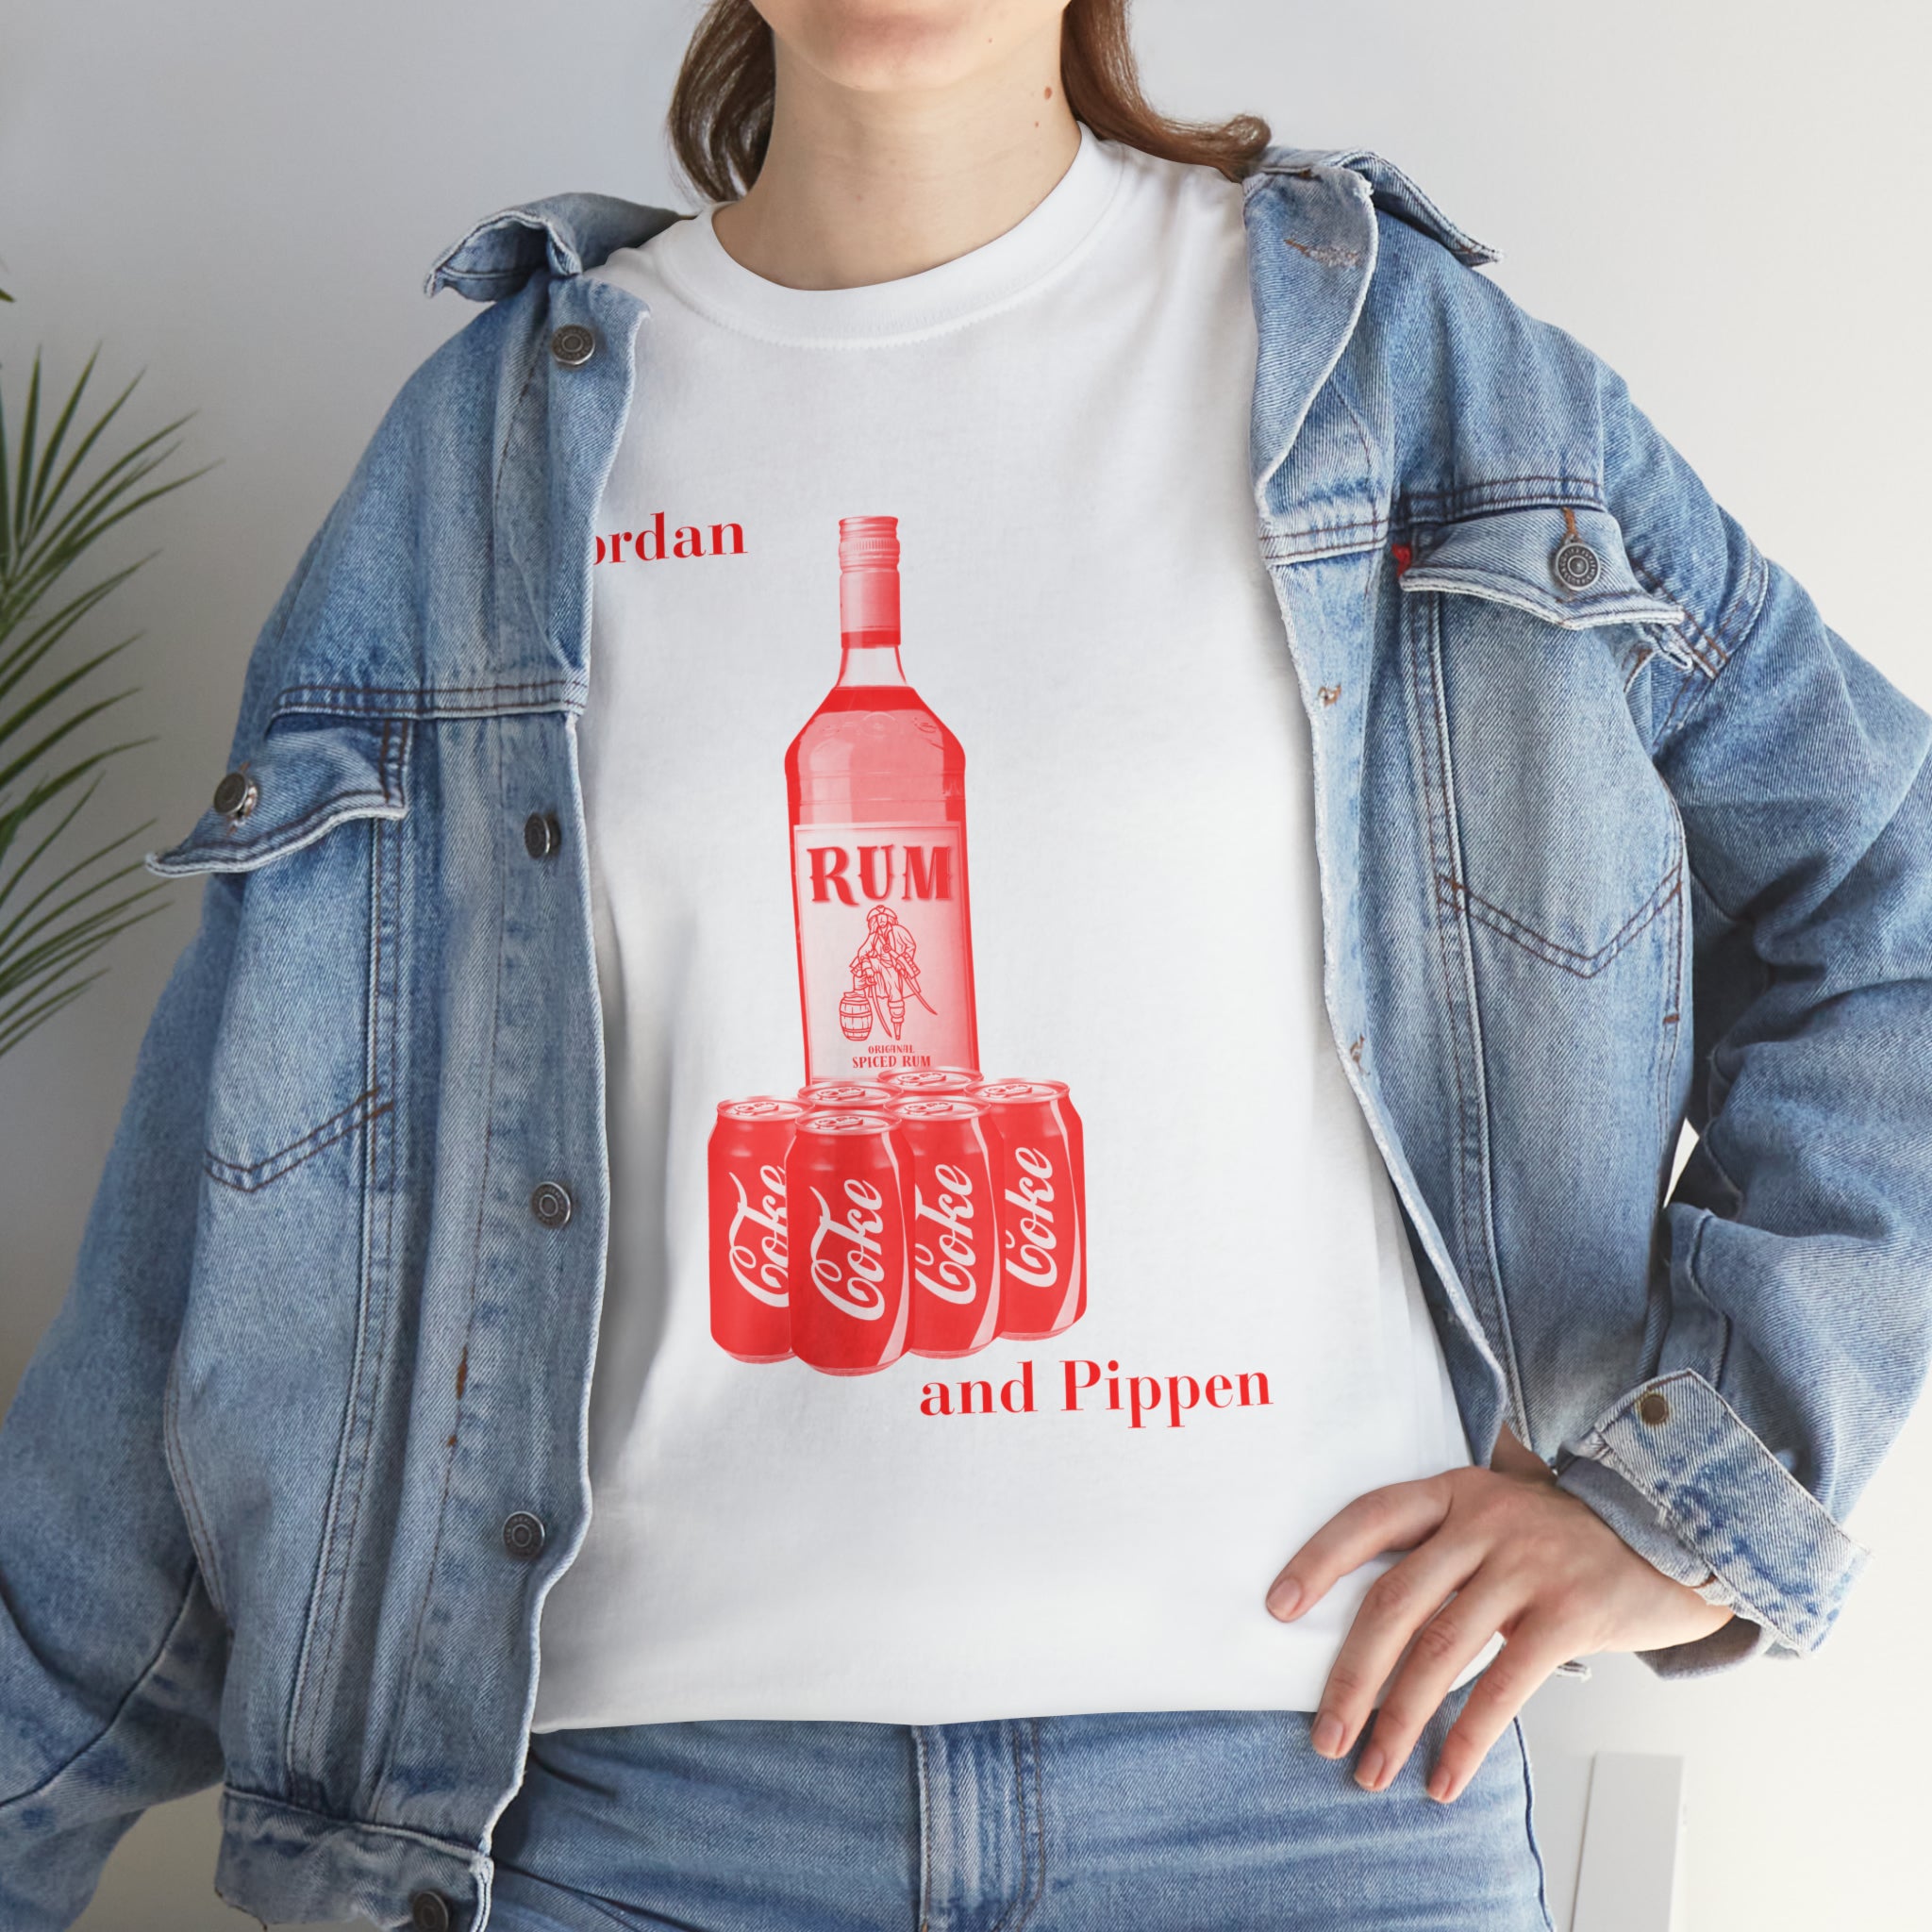 Jordan and Pippen Rum and Coke - Unisex Heavy Cotton Tee